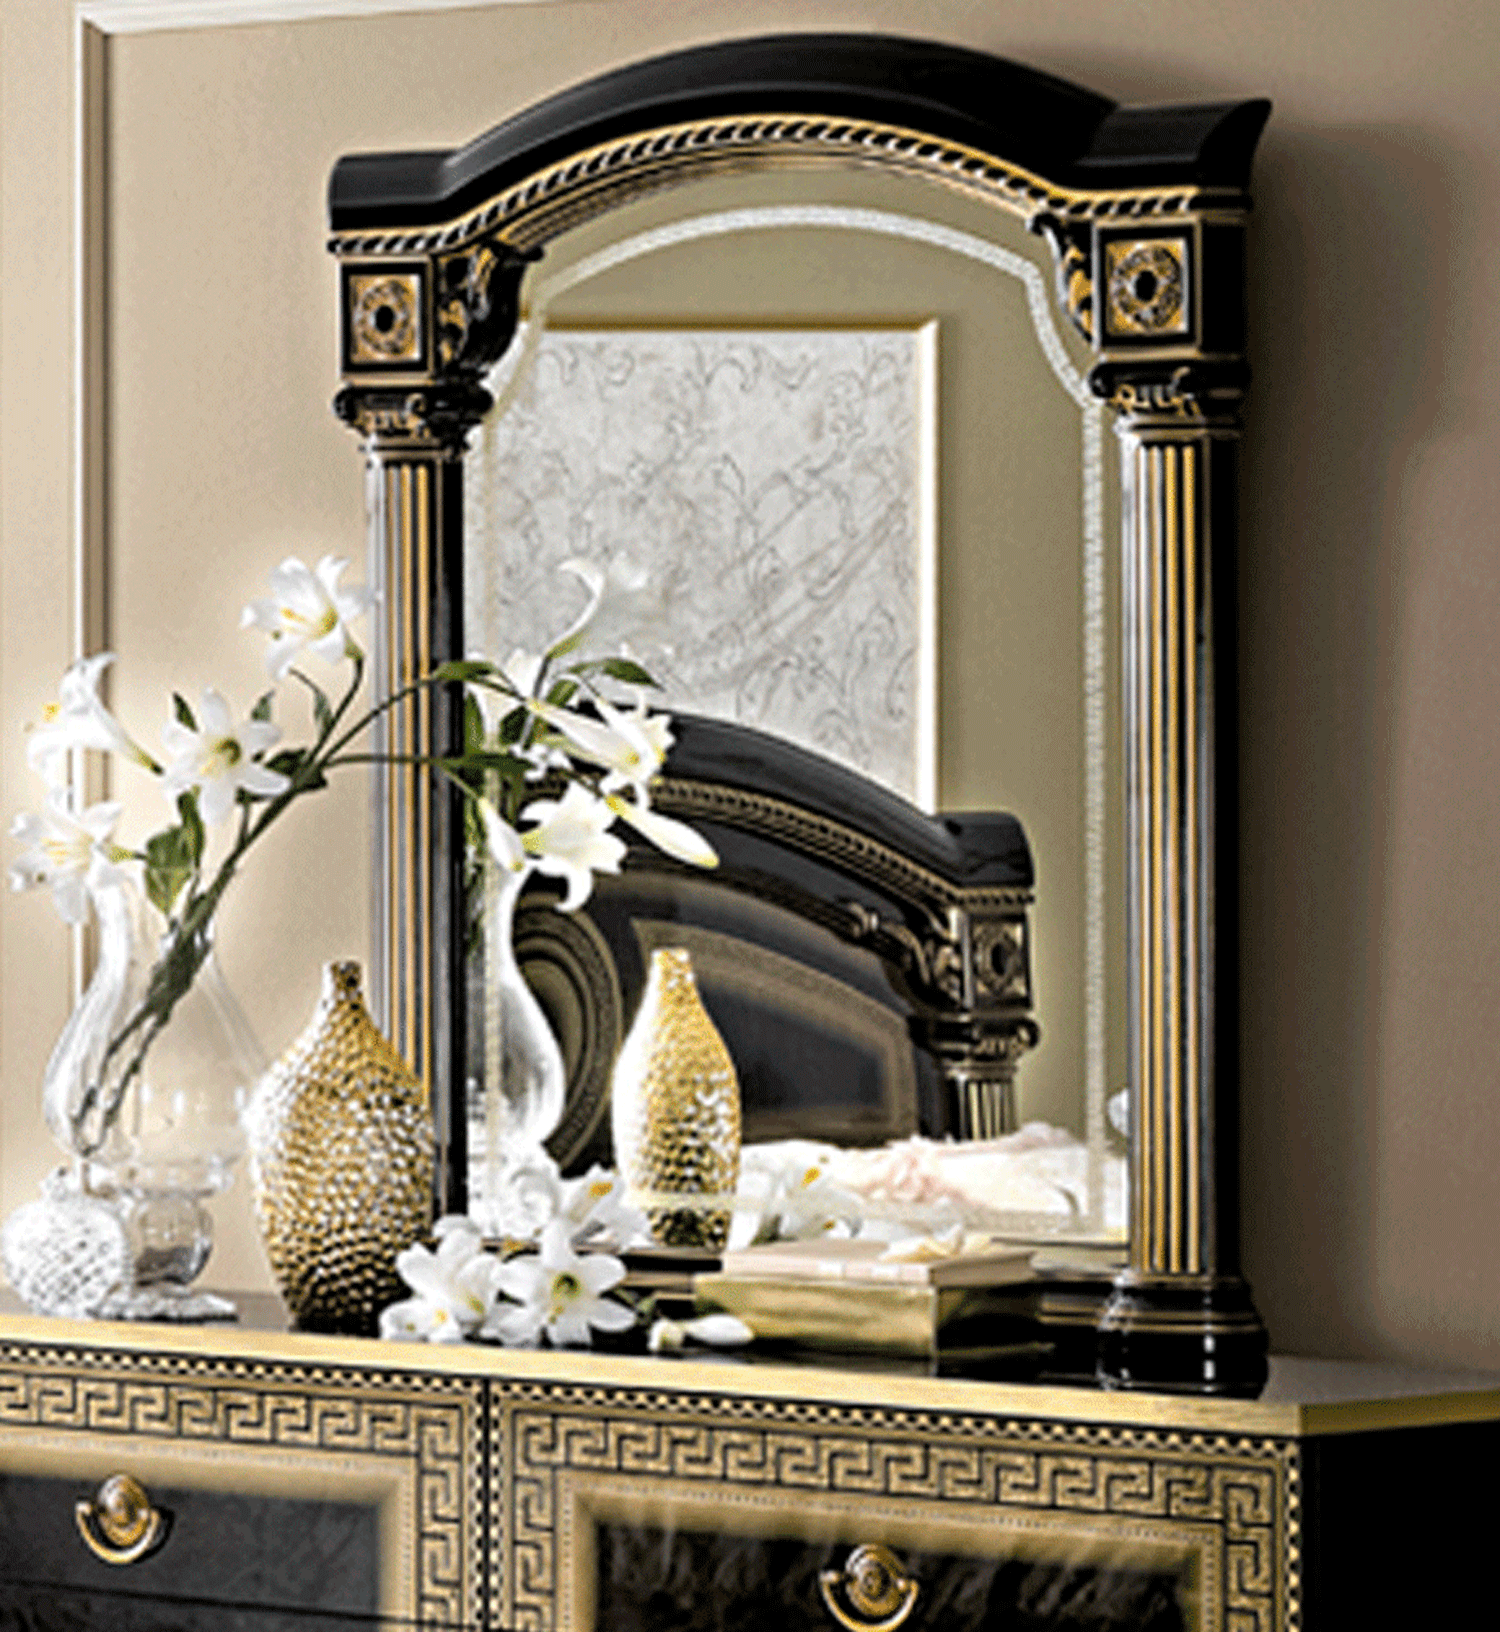 Brands Camel Gold Collection, Italy Aida Black/Gold mirror